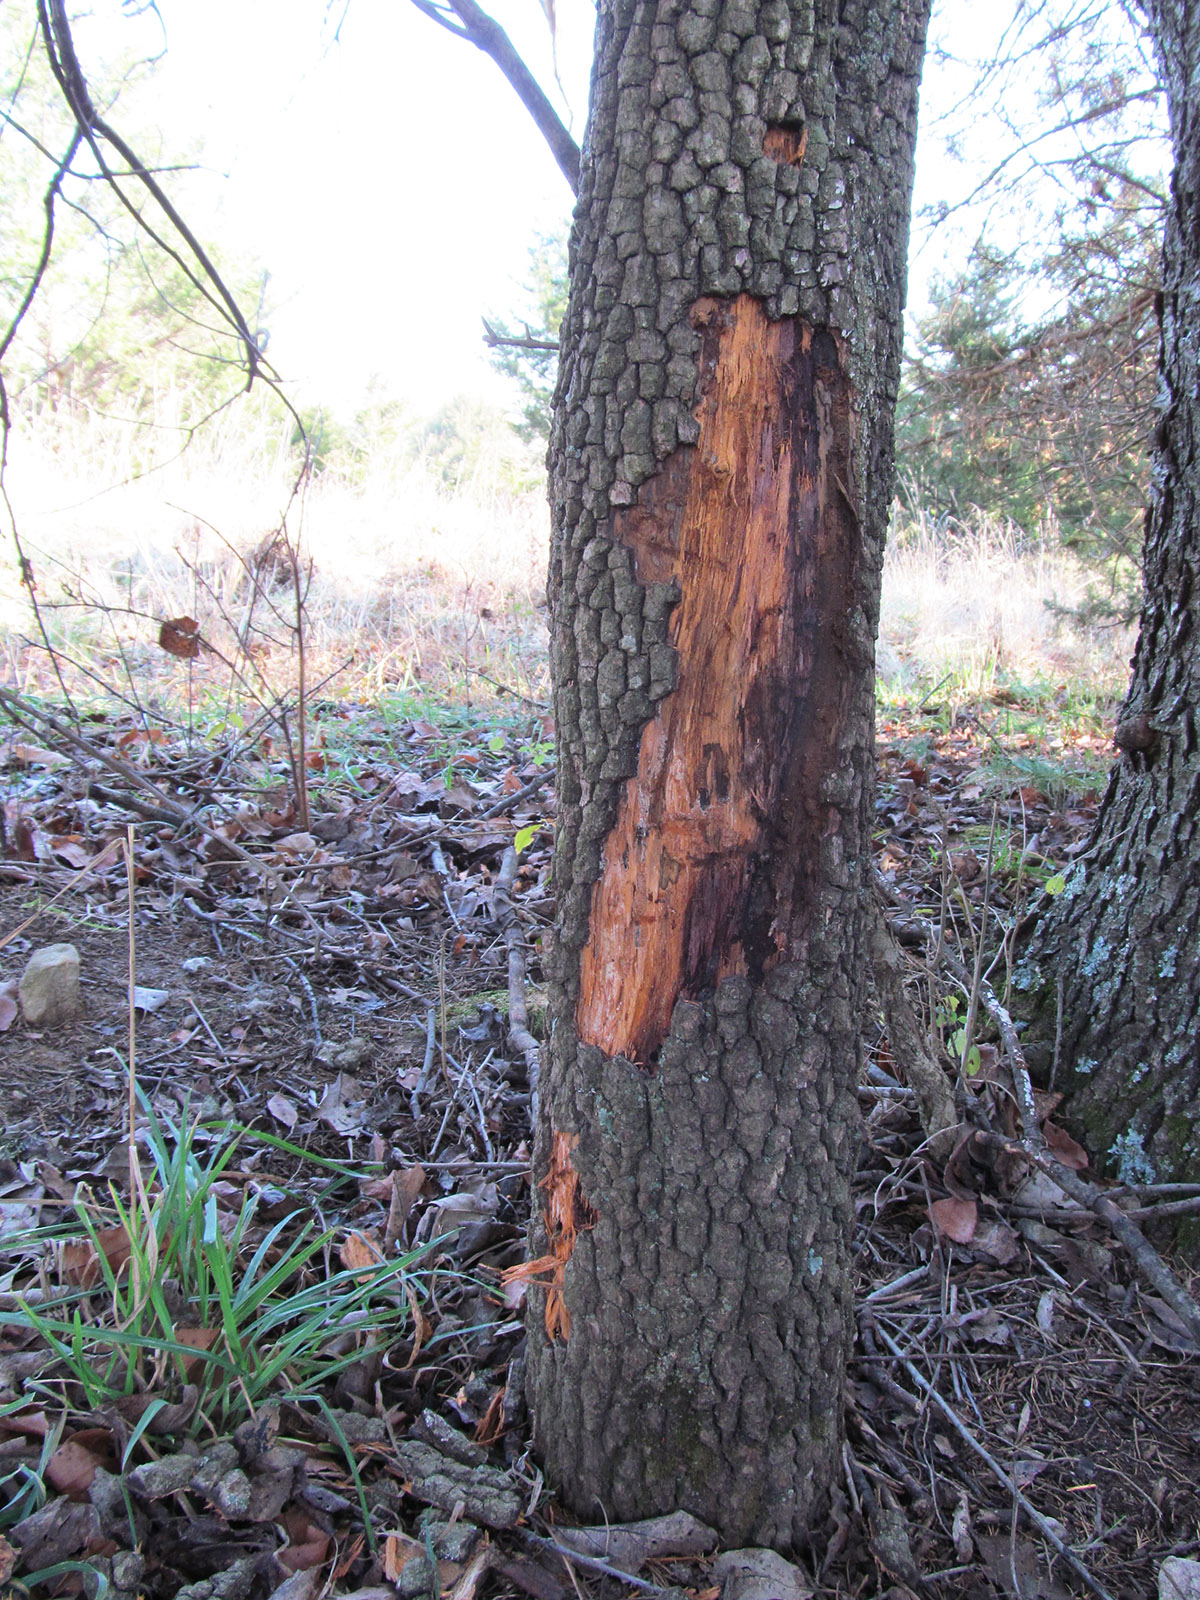 An image of a tree with rub marks on it from deer carving deep gouges into the wood